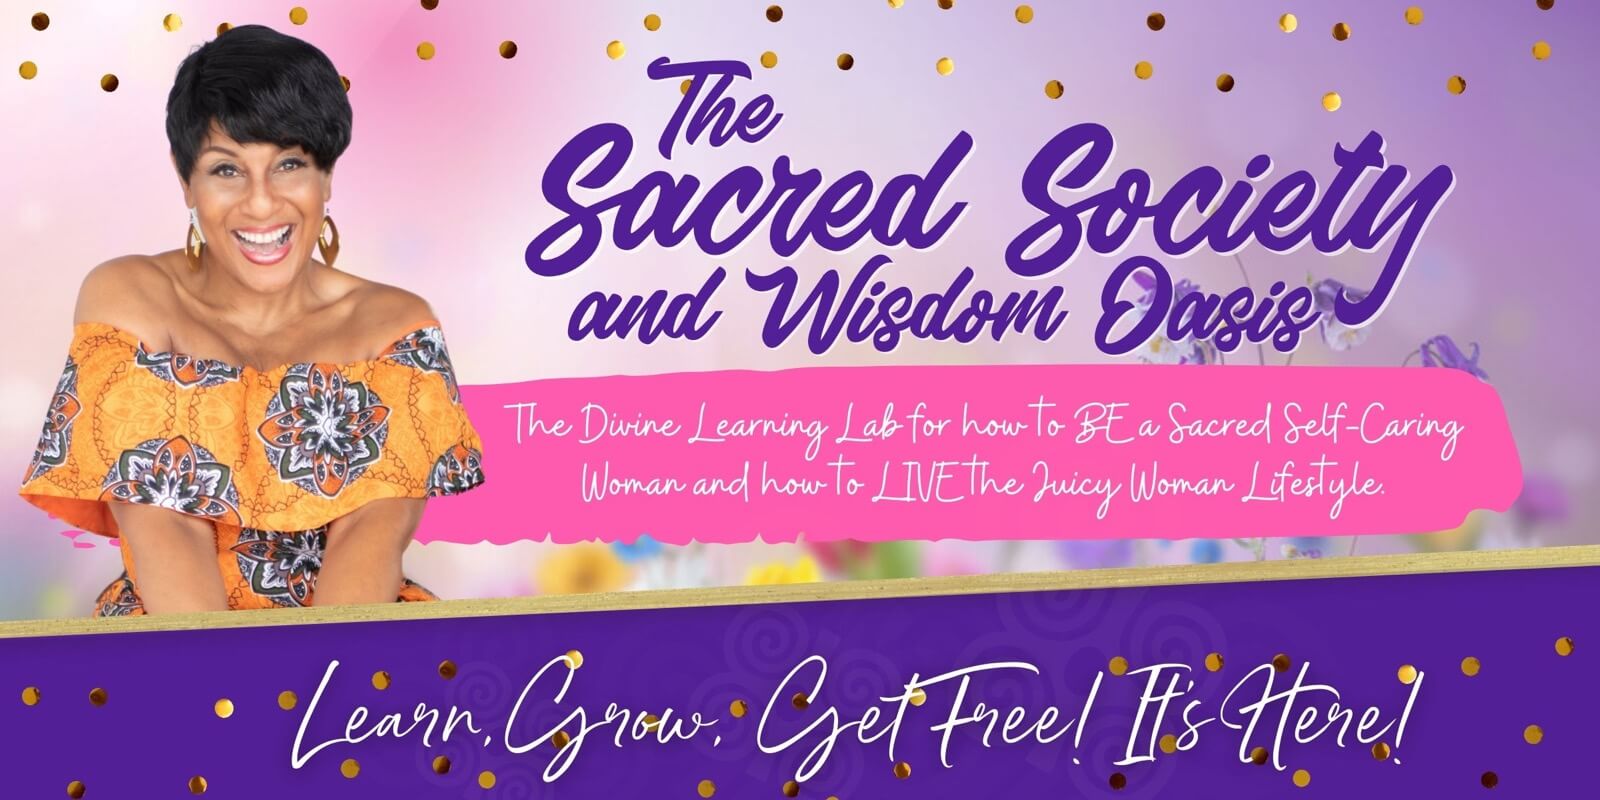 The Sacred Society and Wisdom Oasis